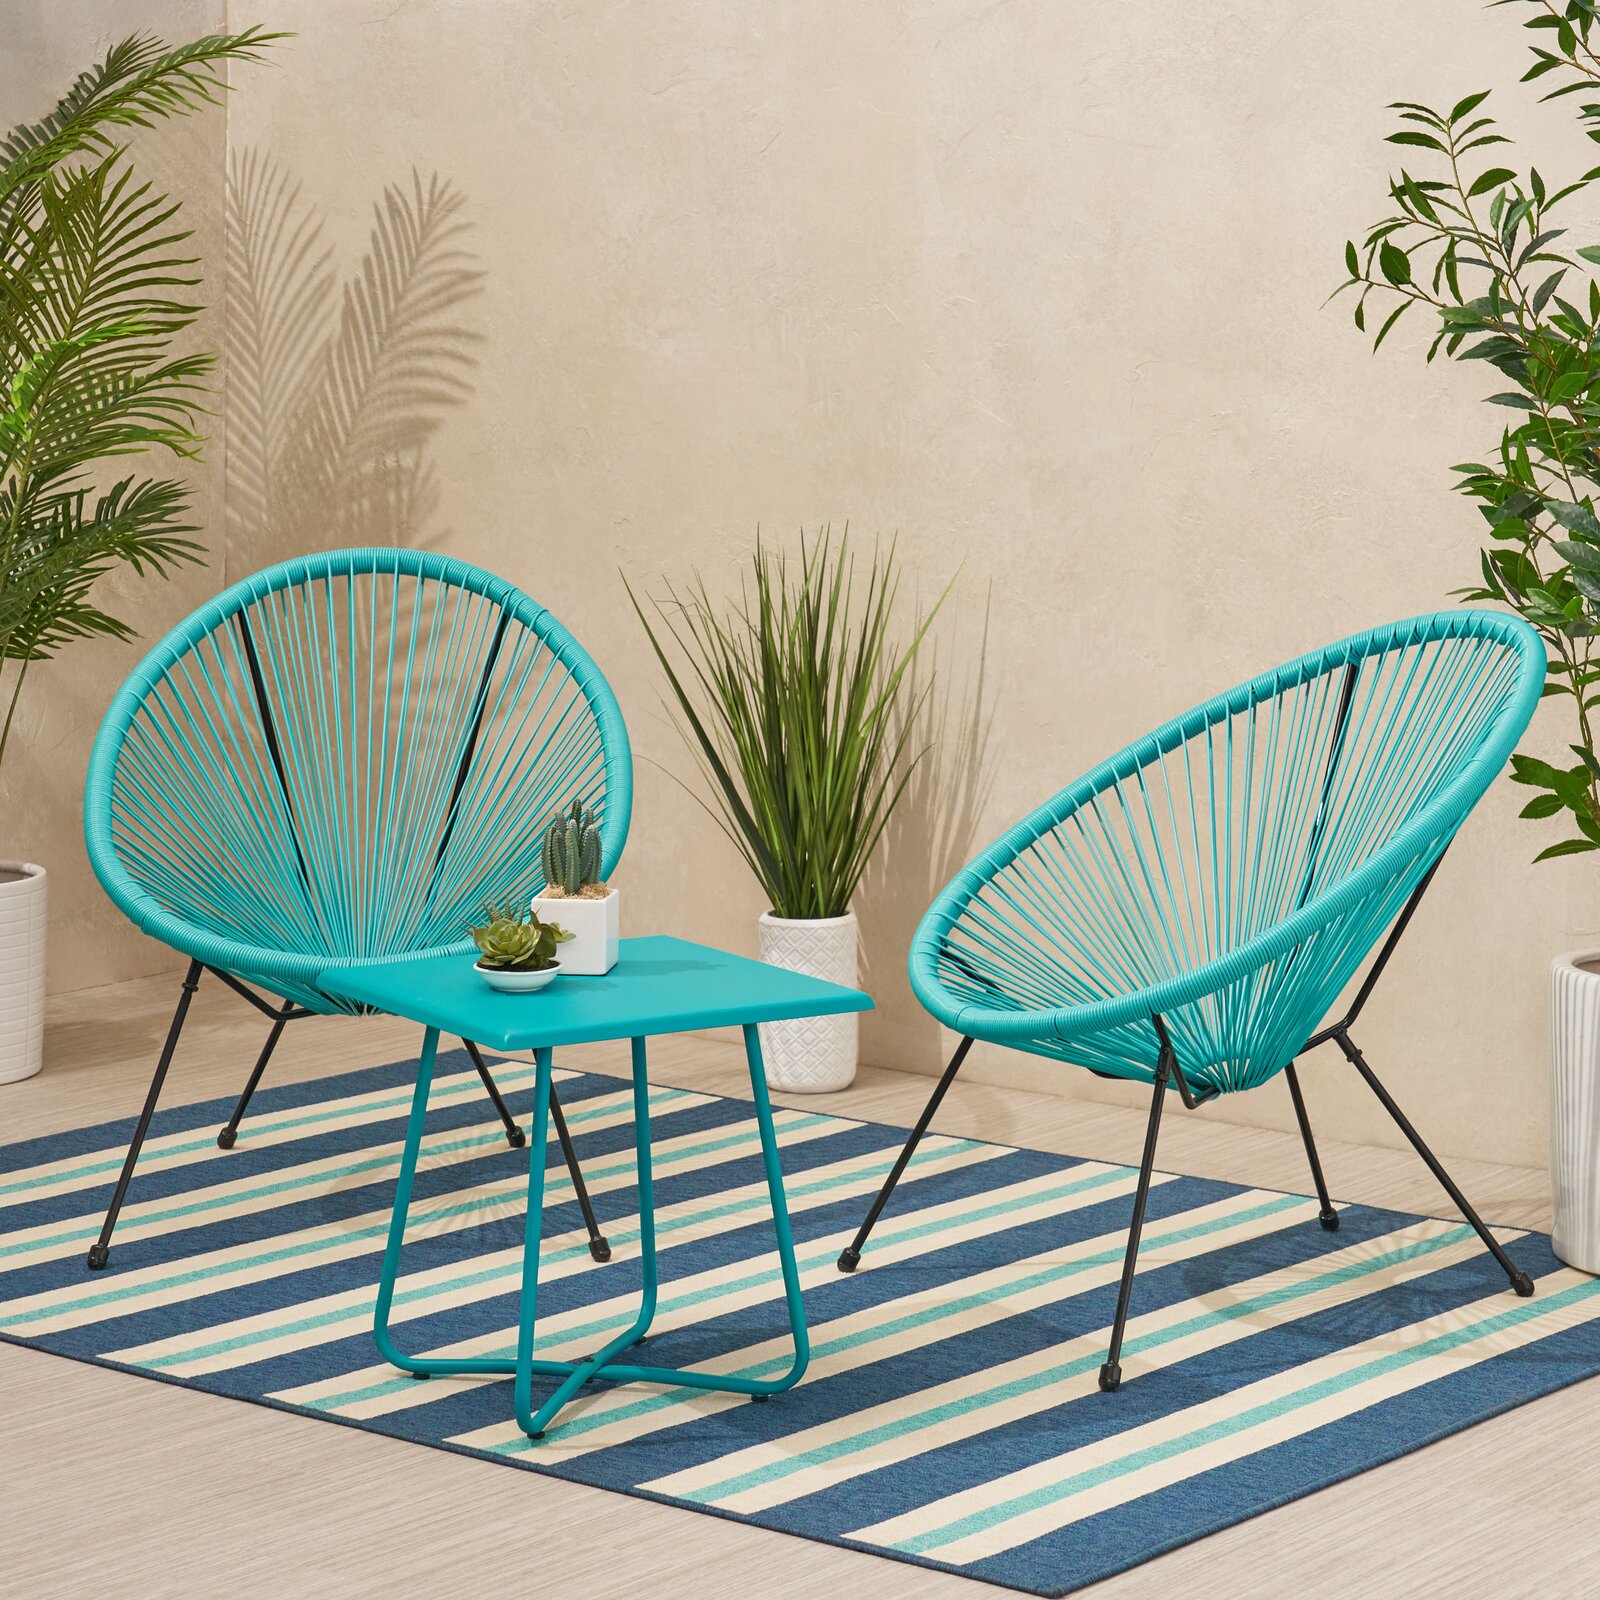 Josephson Outdoor Woven Rattan Seating Group, 2 Chair: Yes, Frame Durability: Weather Resistant - image 1 of 7